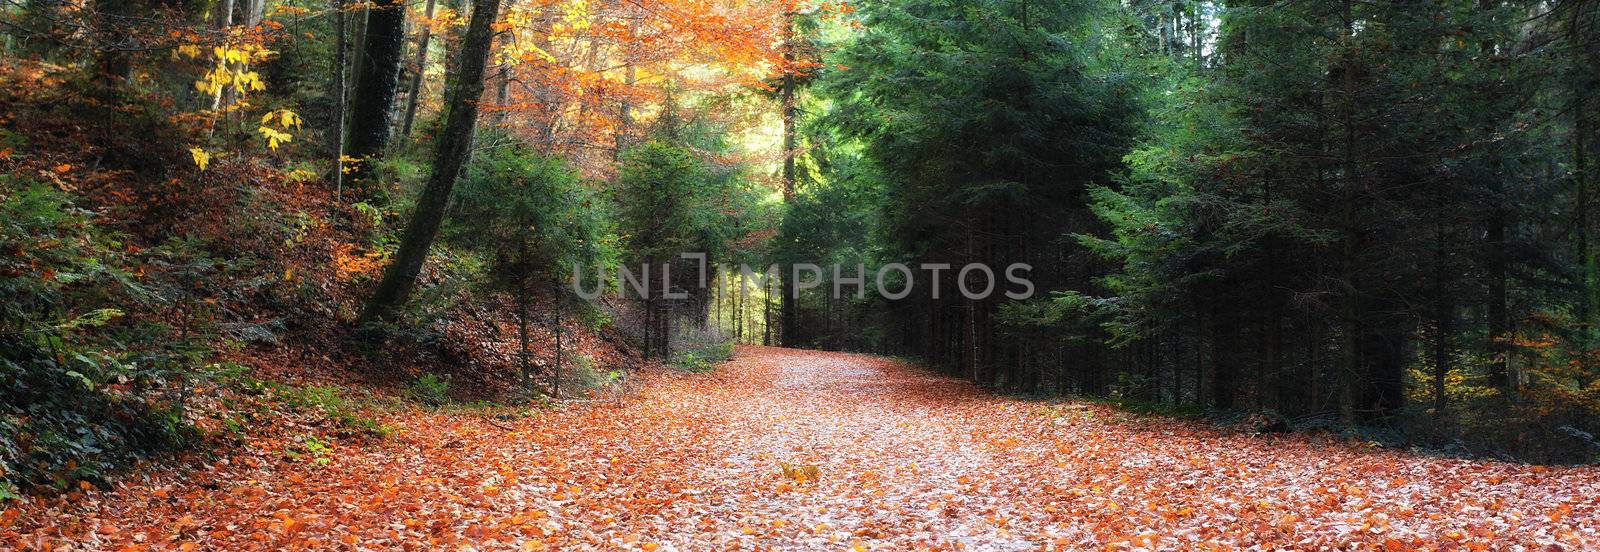 autumn road by vwalakte